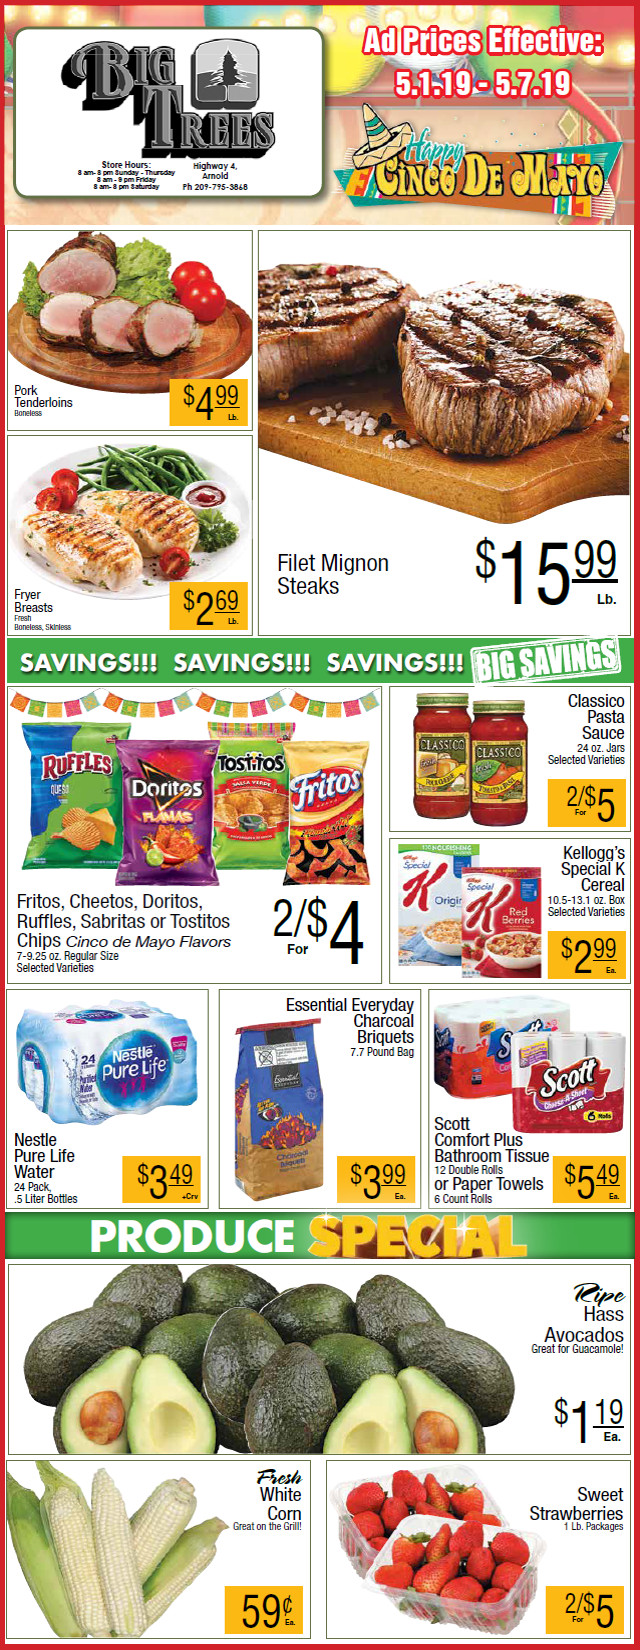 Big Trees Market Weekly Ad & Grocery Specials Through May 7th